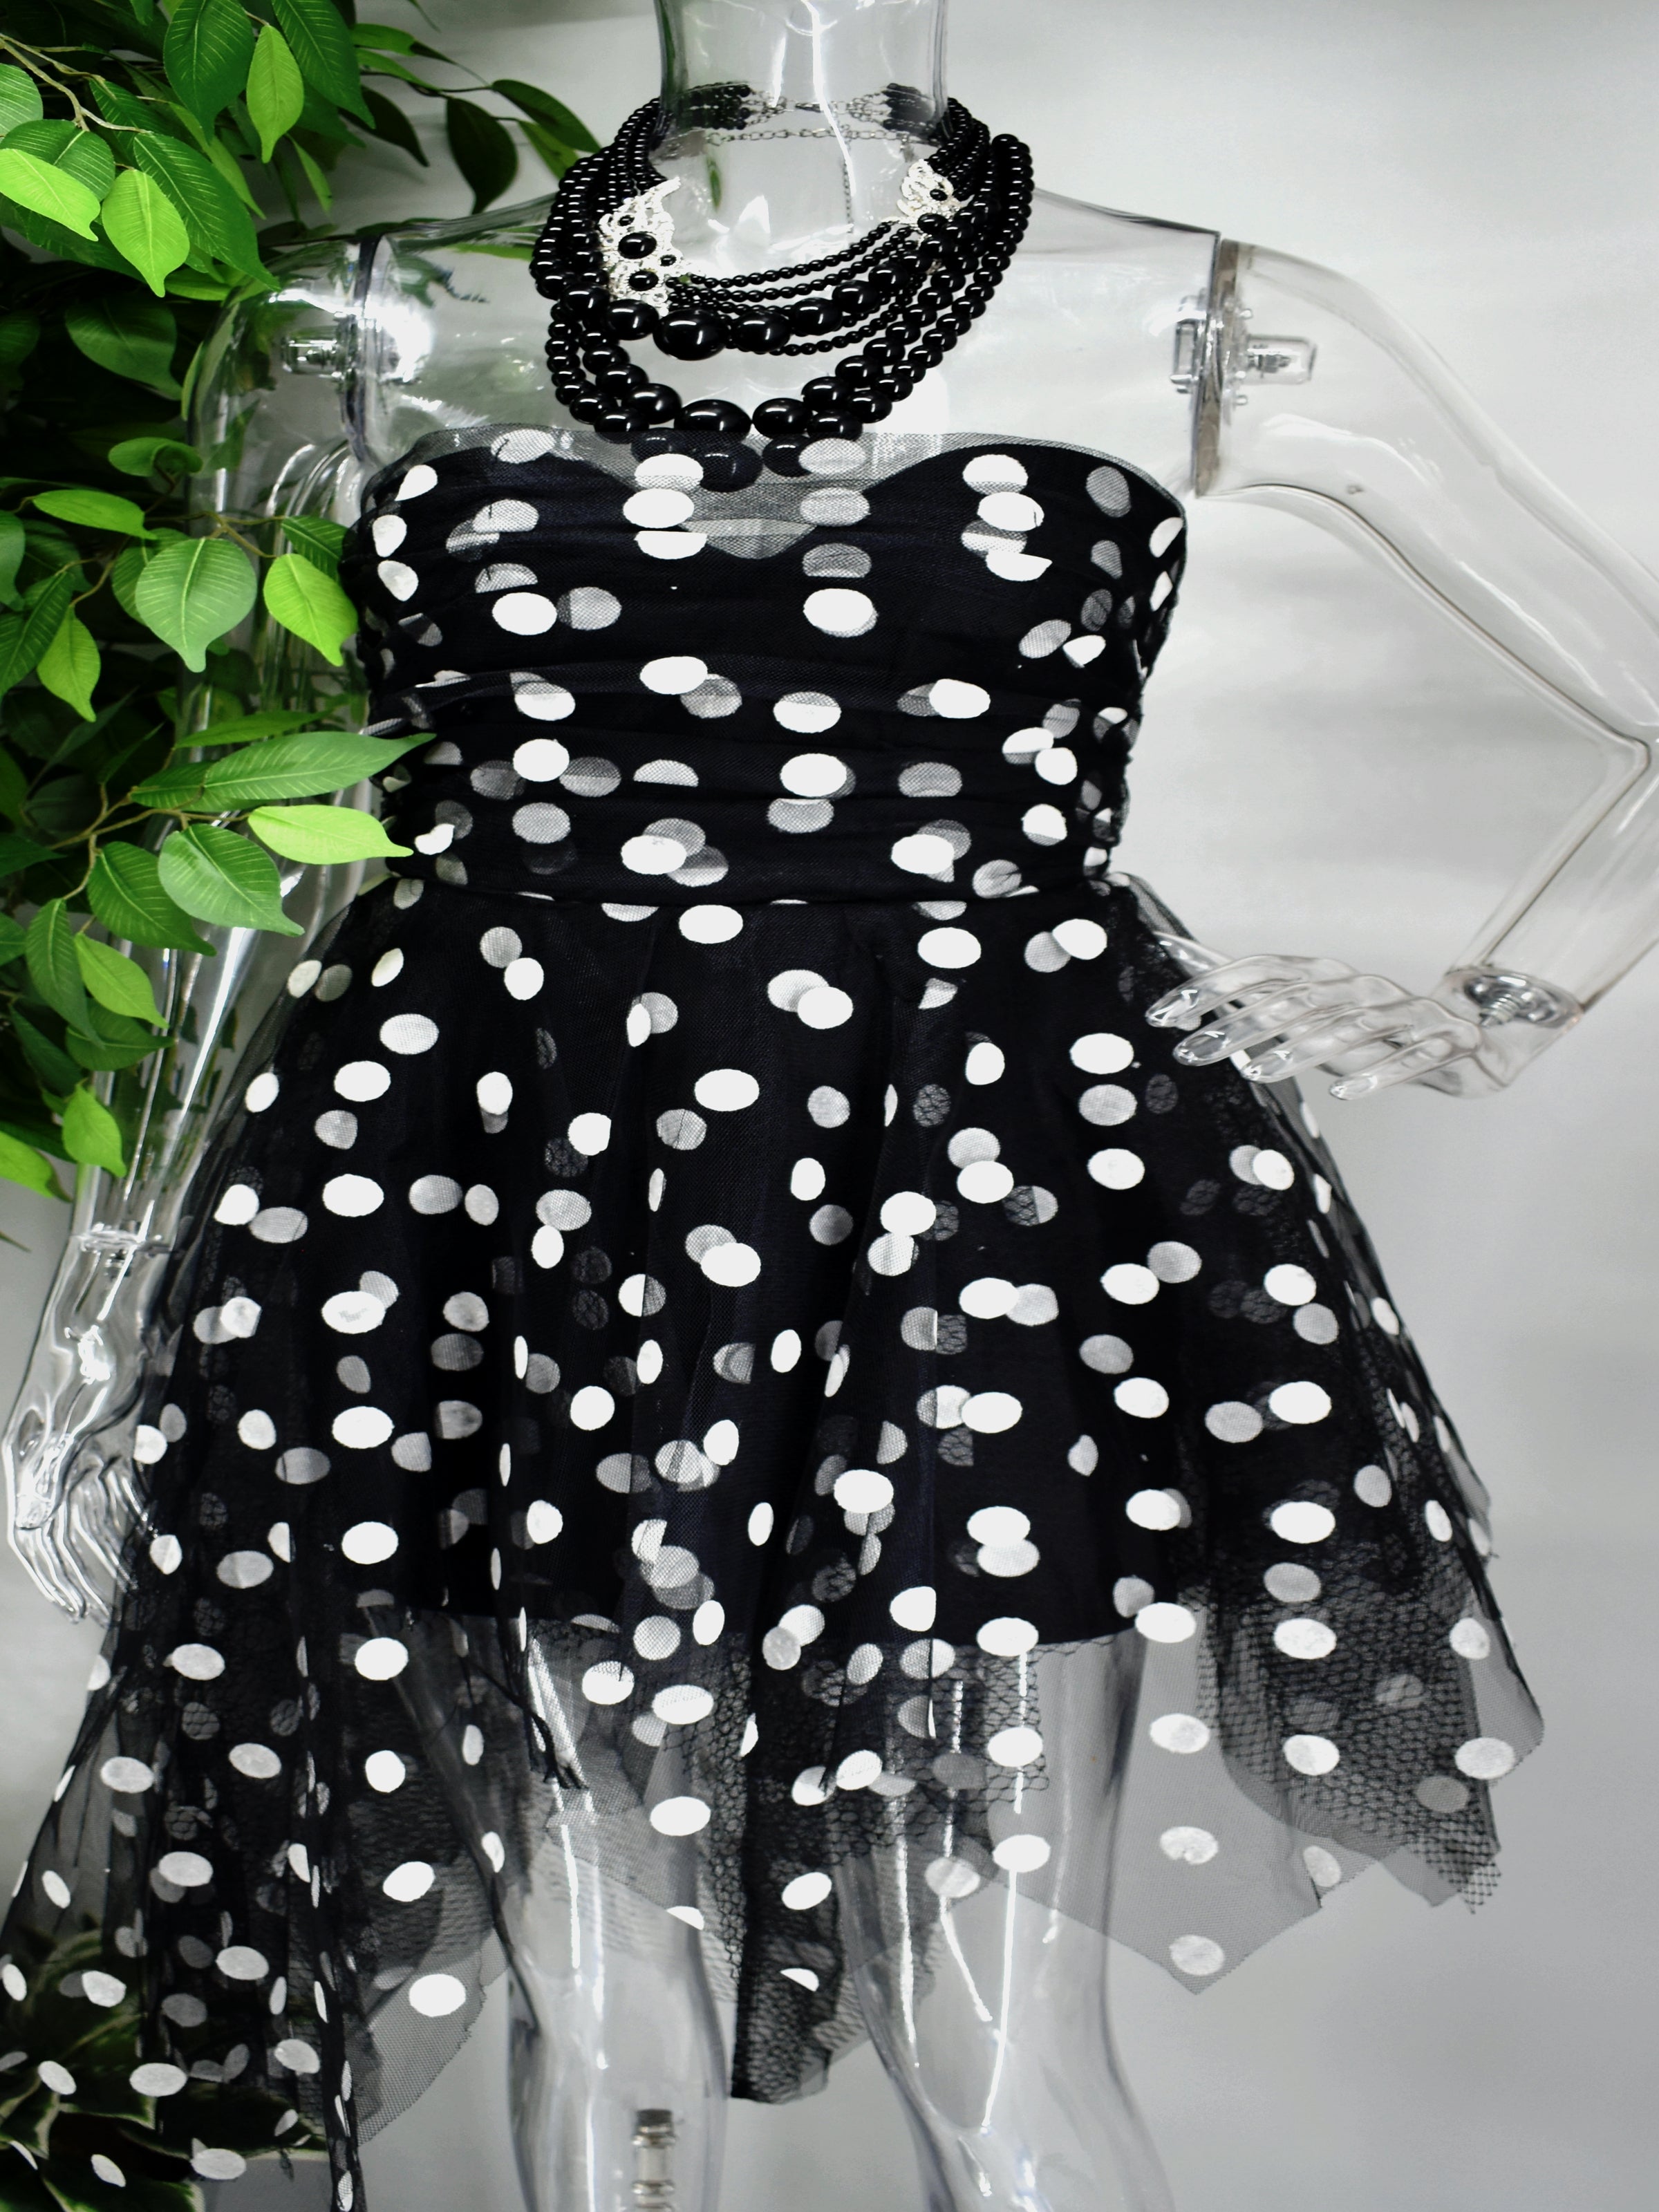 Be Bold and beautiful in our Blessings Polka dot dress.  Enjoy our blessings and its sweetheart neckline, fitted bodice and flirty flair skirt with an uneven hem. 